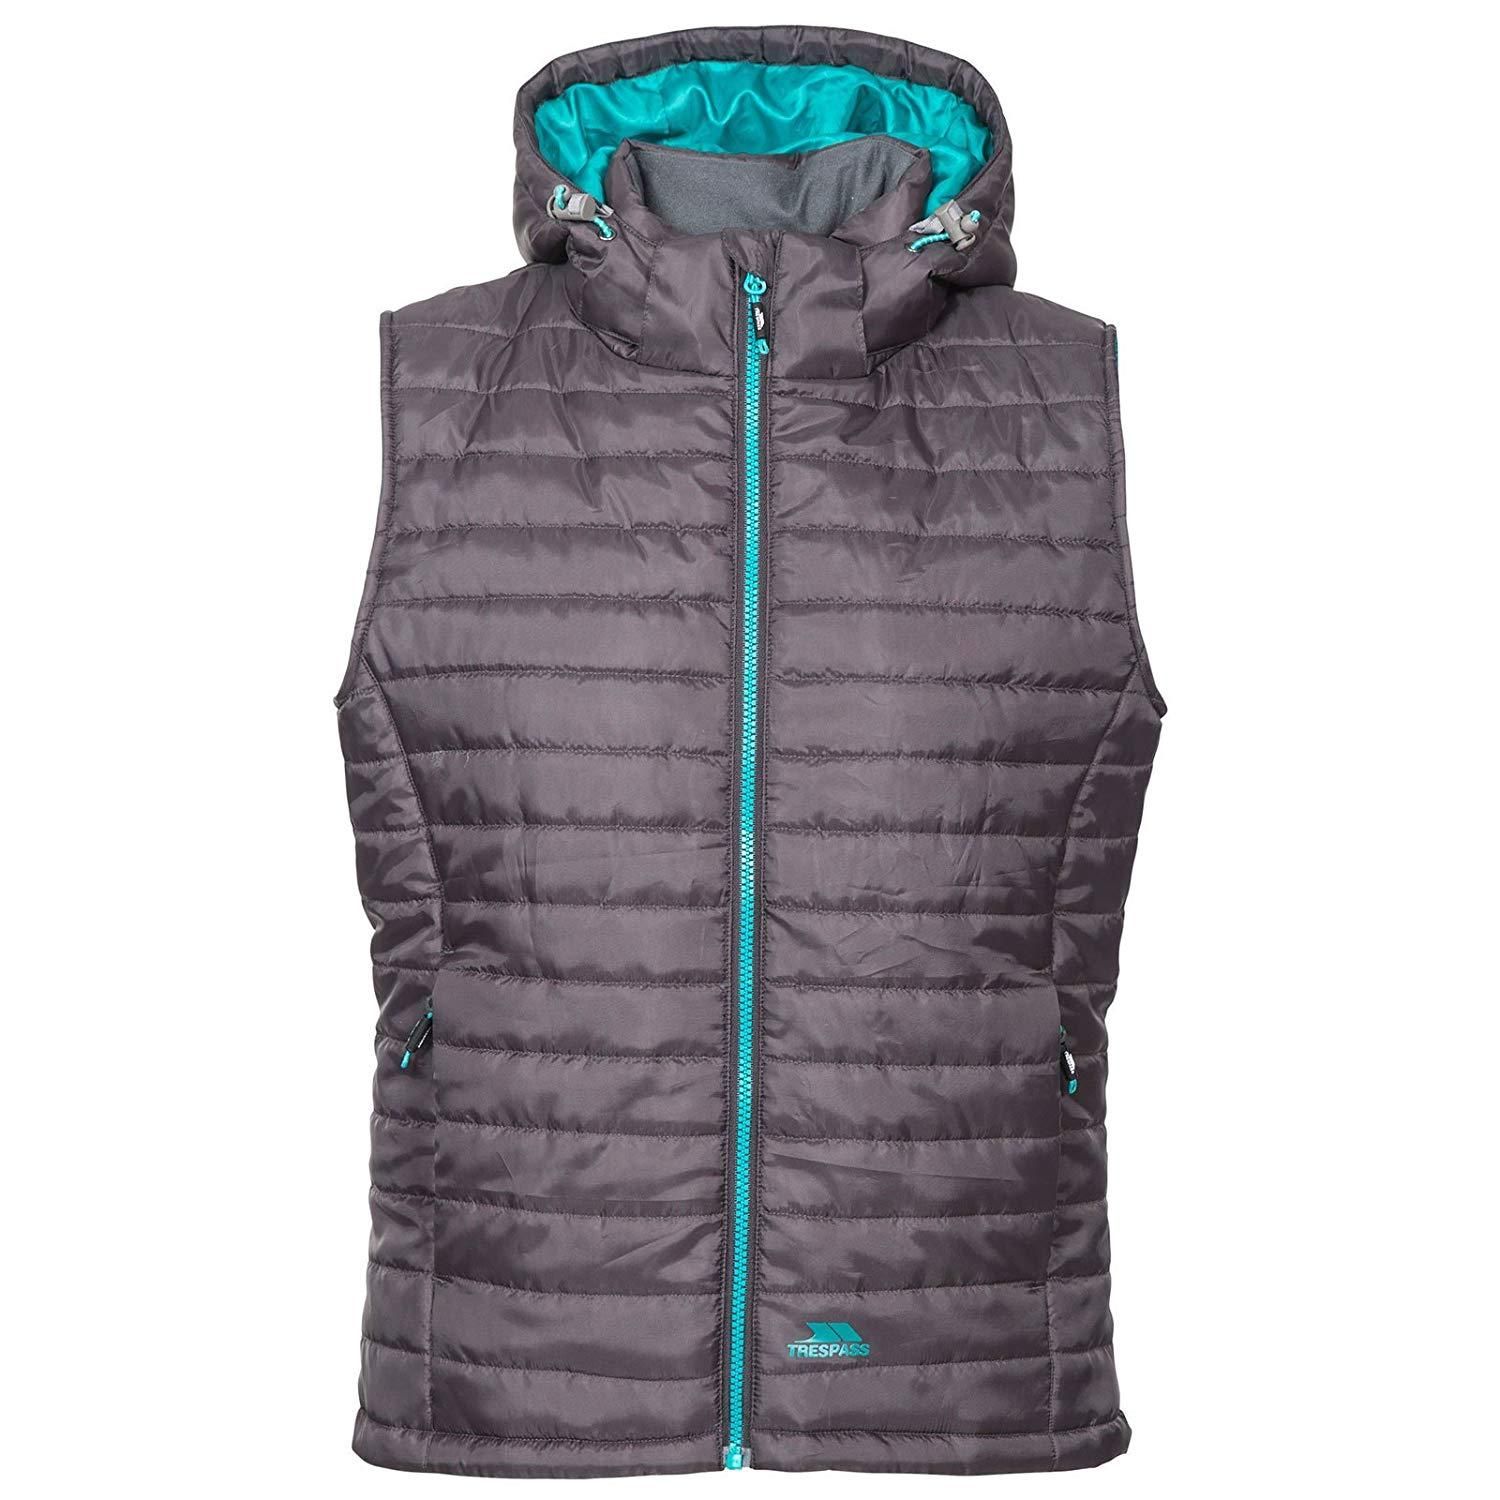 Lightly padded with bubble stitching. Contrast lining and front zip. Inner storm flap. Hem adjusters. 2 low profile zip pockets. Detachable hood with stud fastening. Shell: 100% Polyamide, AC coating, Lining: 100% Polyester, Filling: 100% Polyester. Trespass Womens Chest Sizing (approx): XS/8 - 32in/81cm, S/10 - 34in/86cm, M/12 - 36in/91.4cm, L/14 - 38in/96.5cm, XL/16 - 40in/101.5cm, XXL/18 - 42in/106.5cm, 3XL/20 - 54.7in/139cm, 4XL/22- 58.6in/149cm, 5XL/24 - 62.5in.159cm.